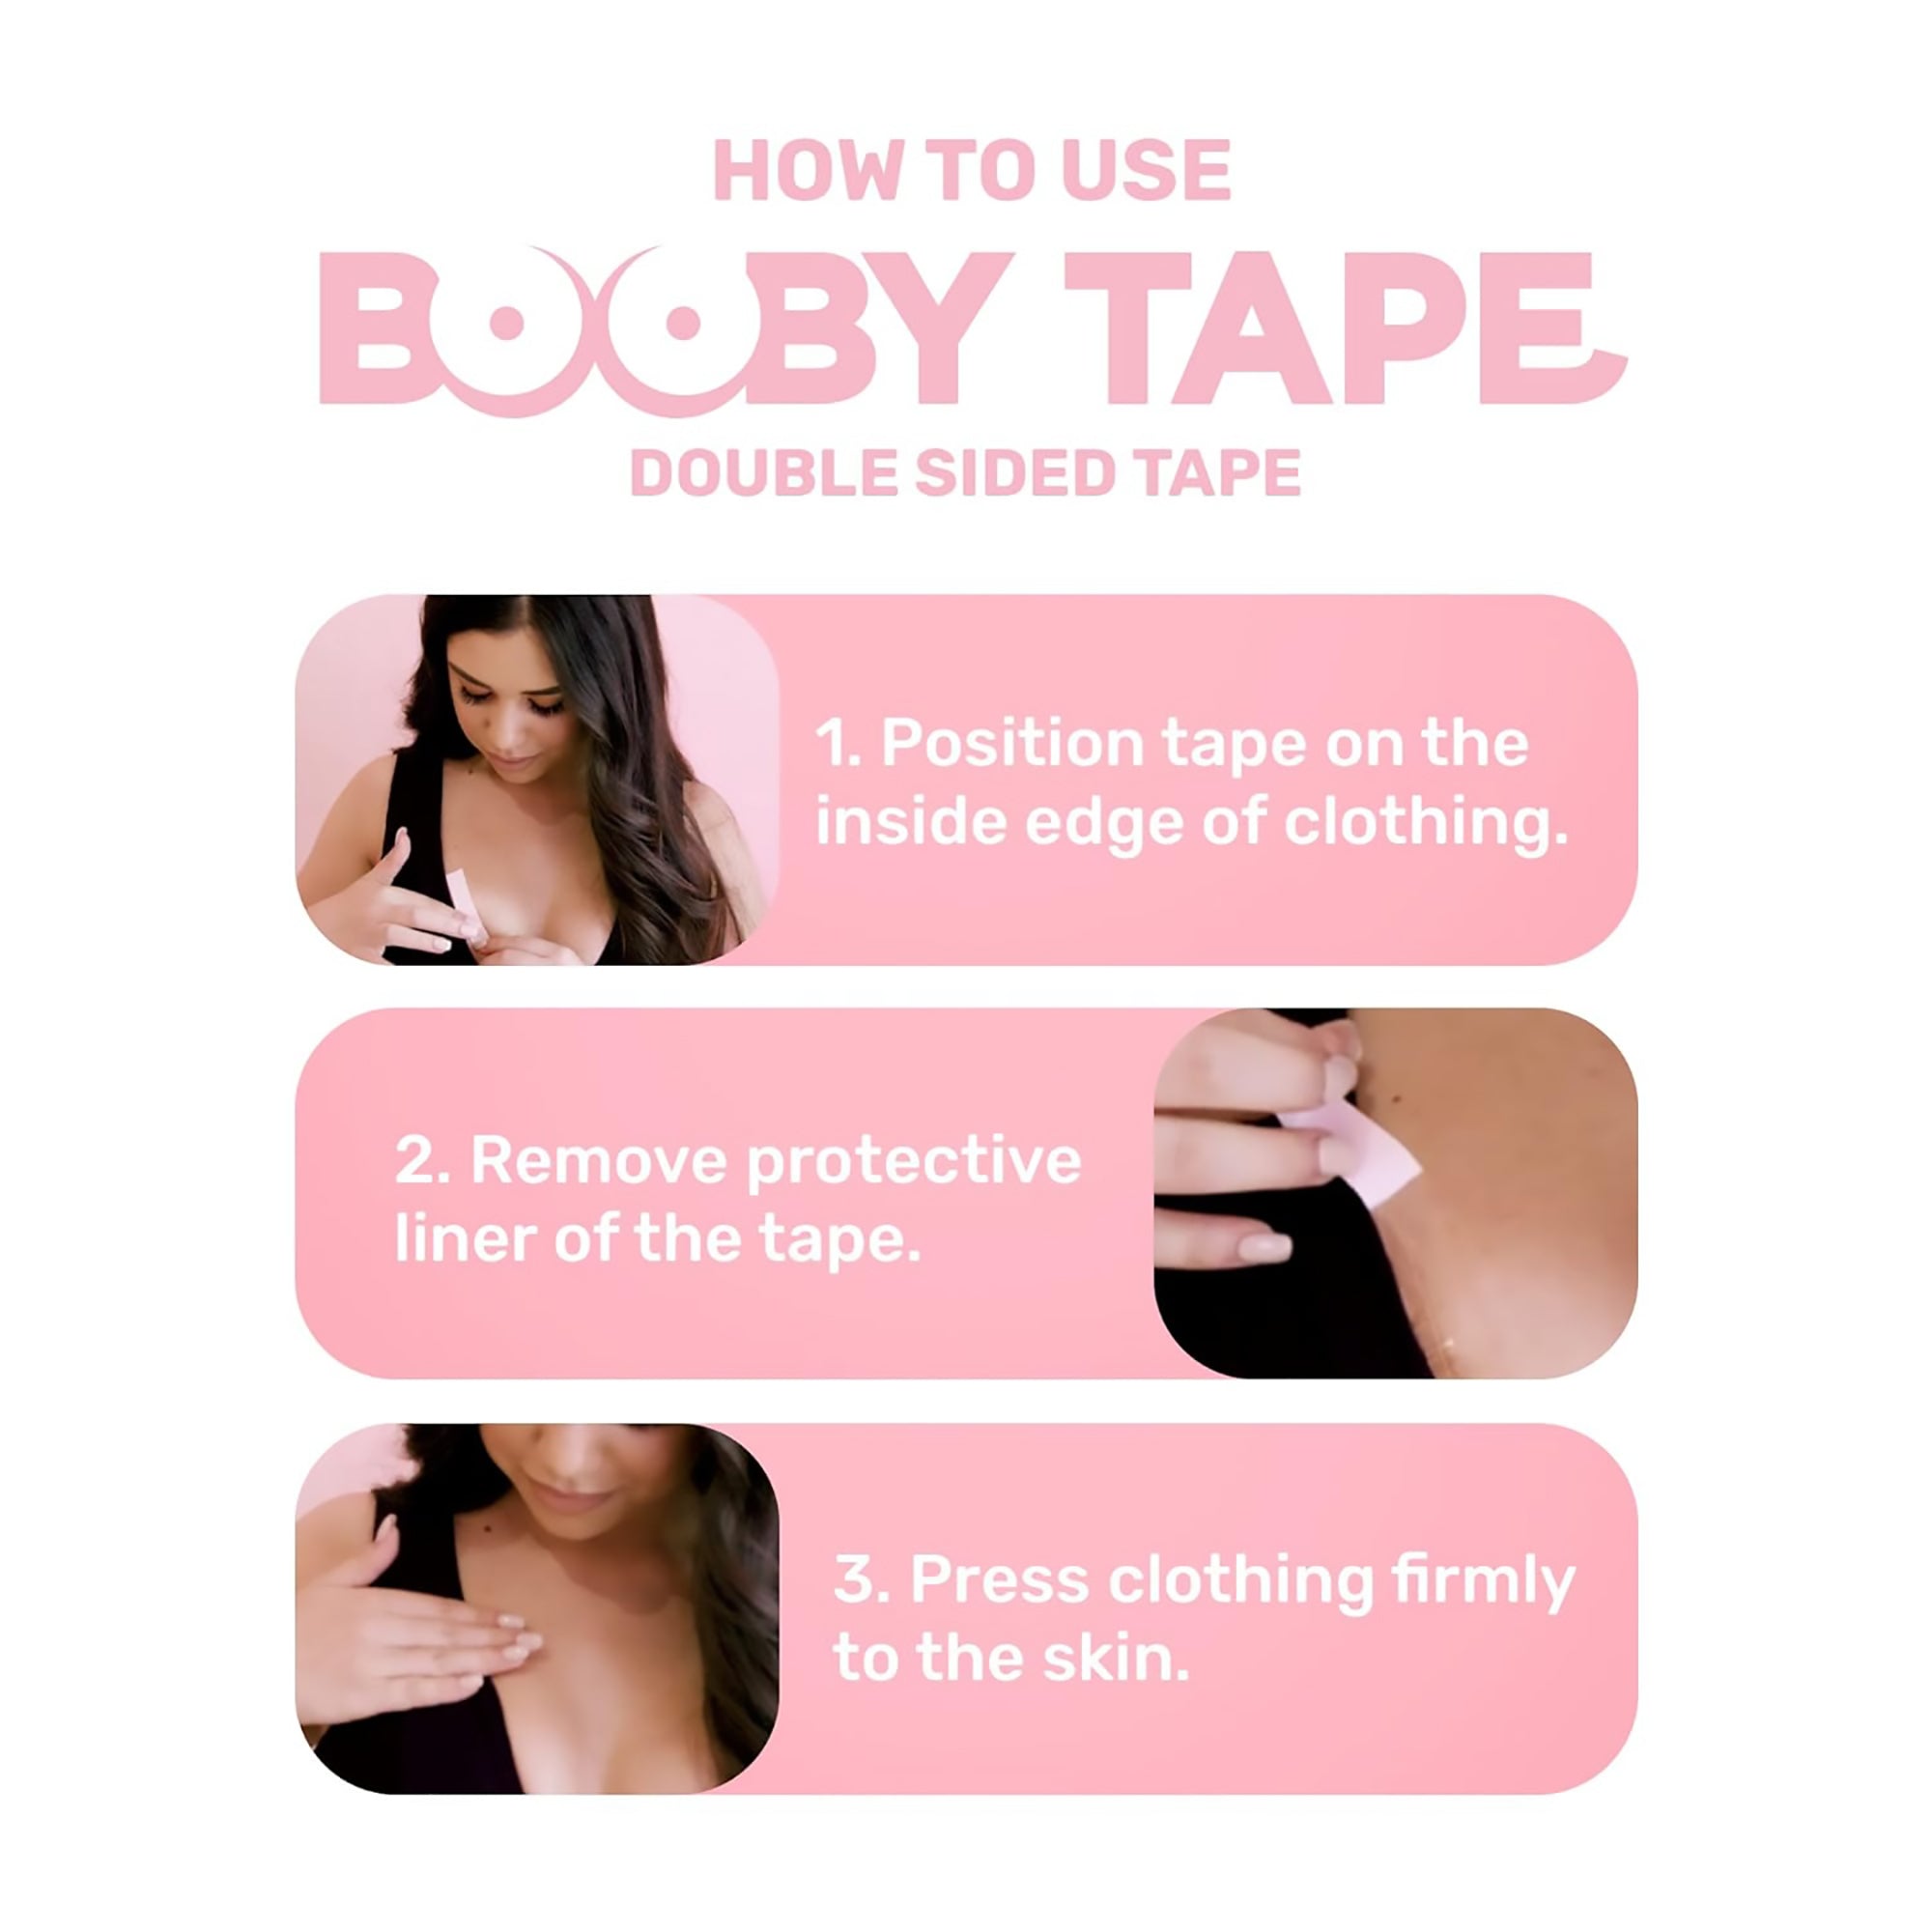 dualipa Wearing Booby Tape Double Sided Tape to prevent nip slips 🙌🏼  #boobytape